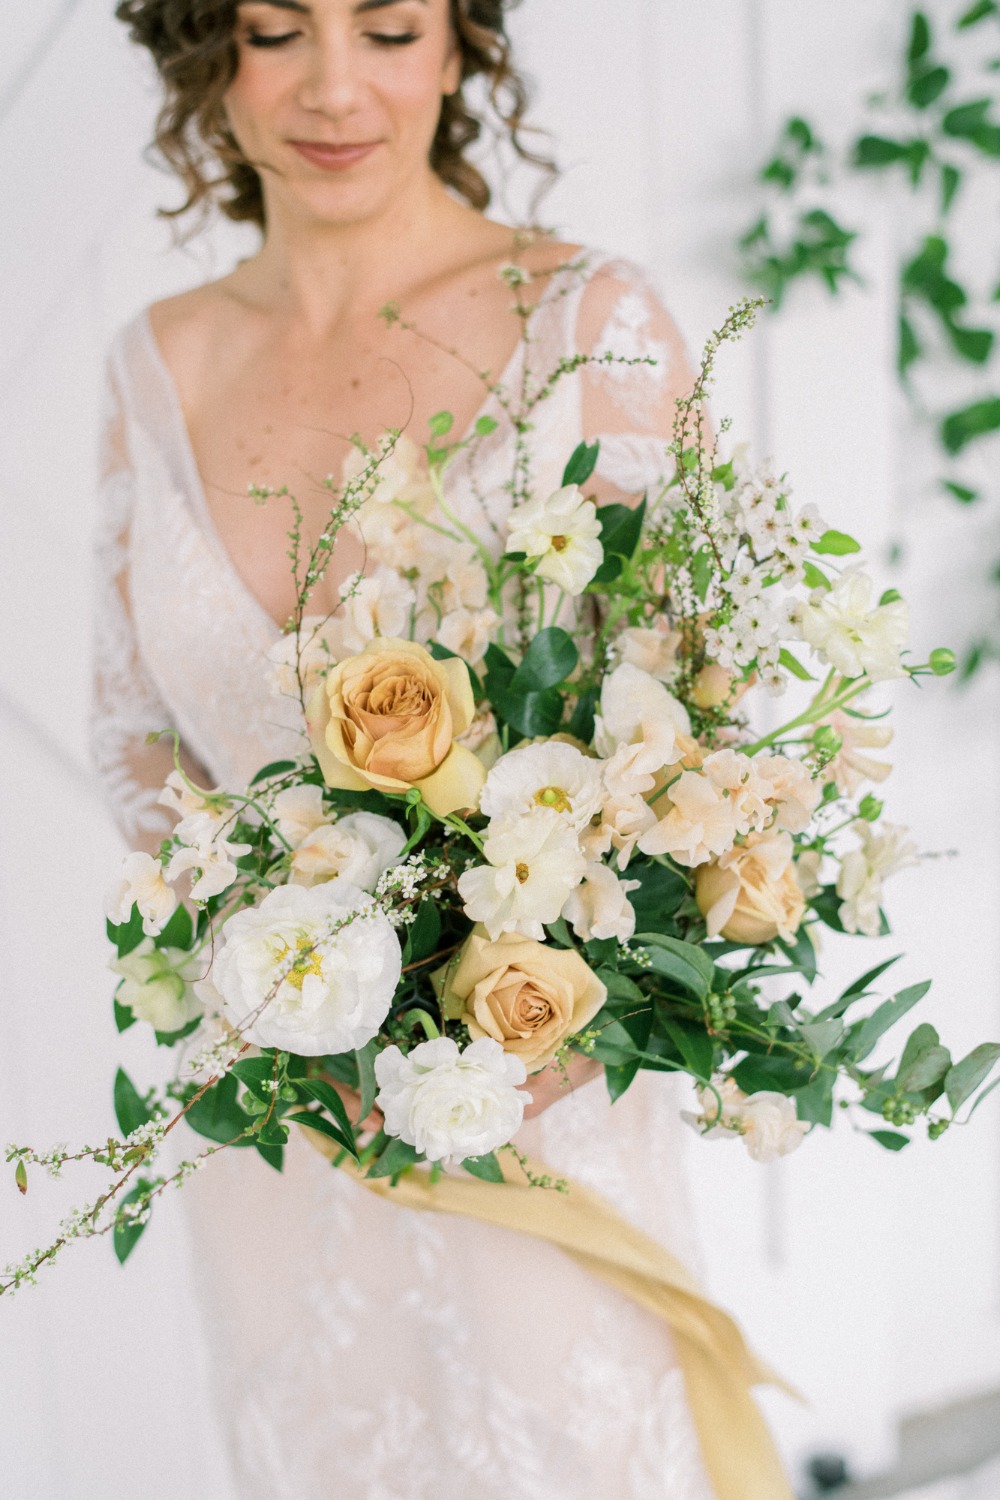 sepia toned wedding bouquet styled by Idlewild Floral